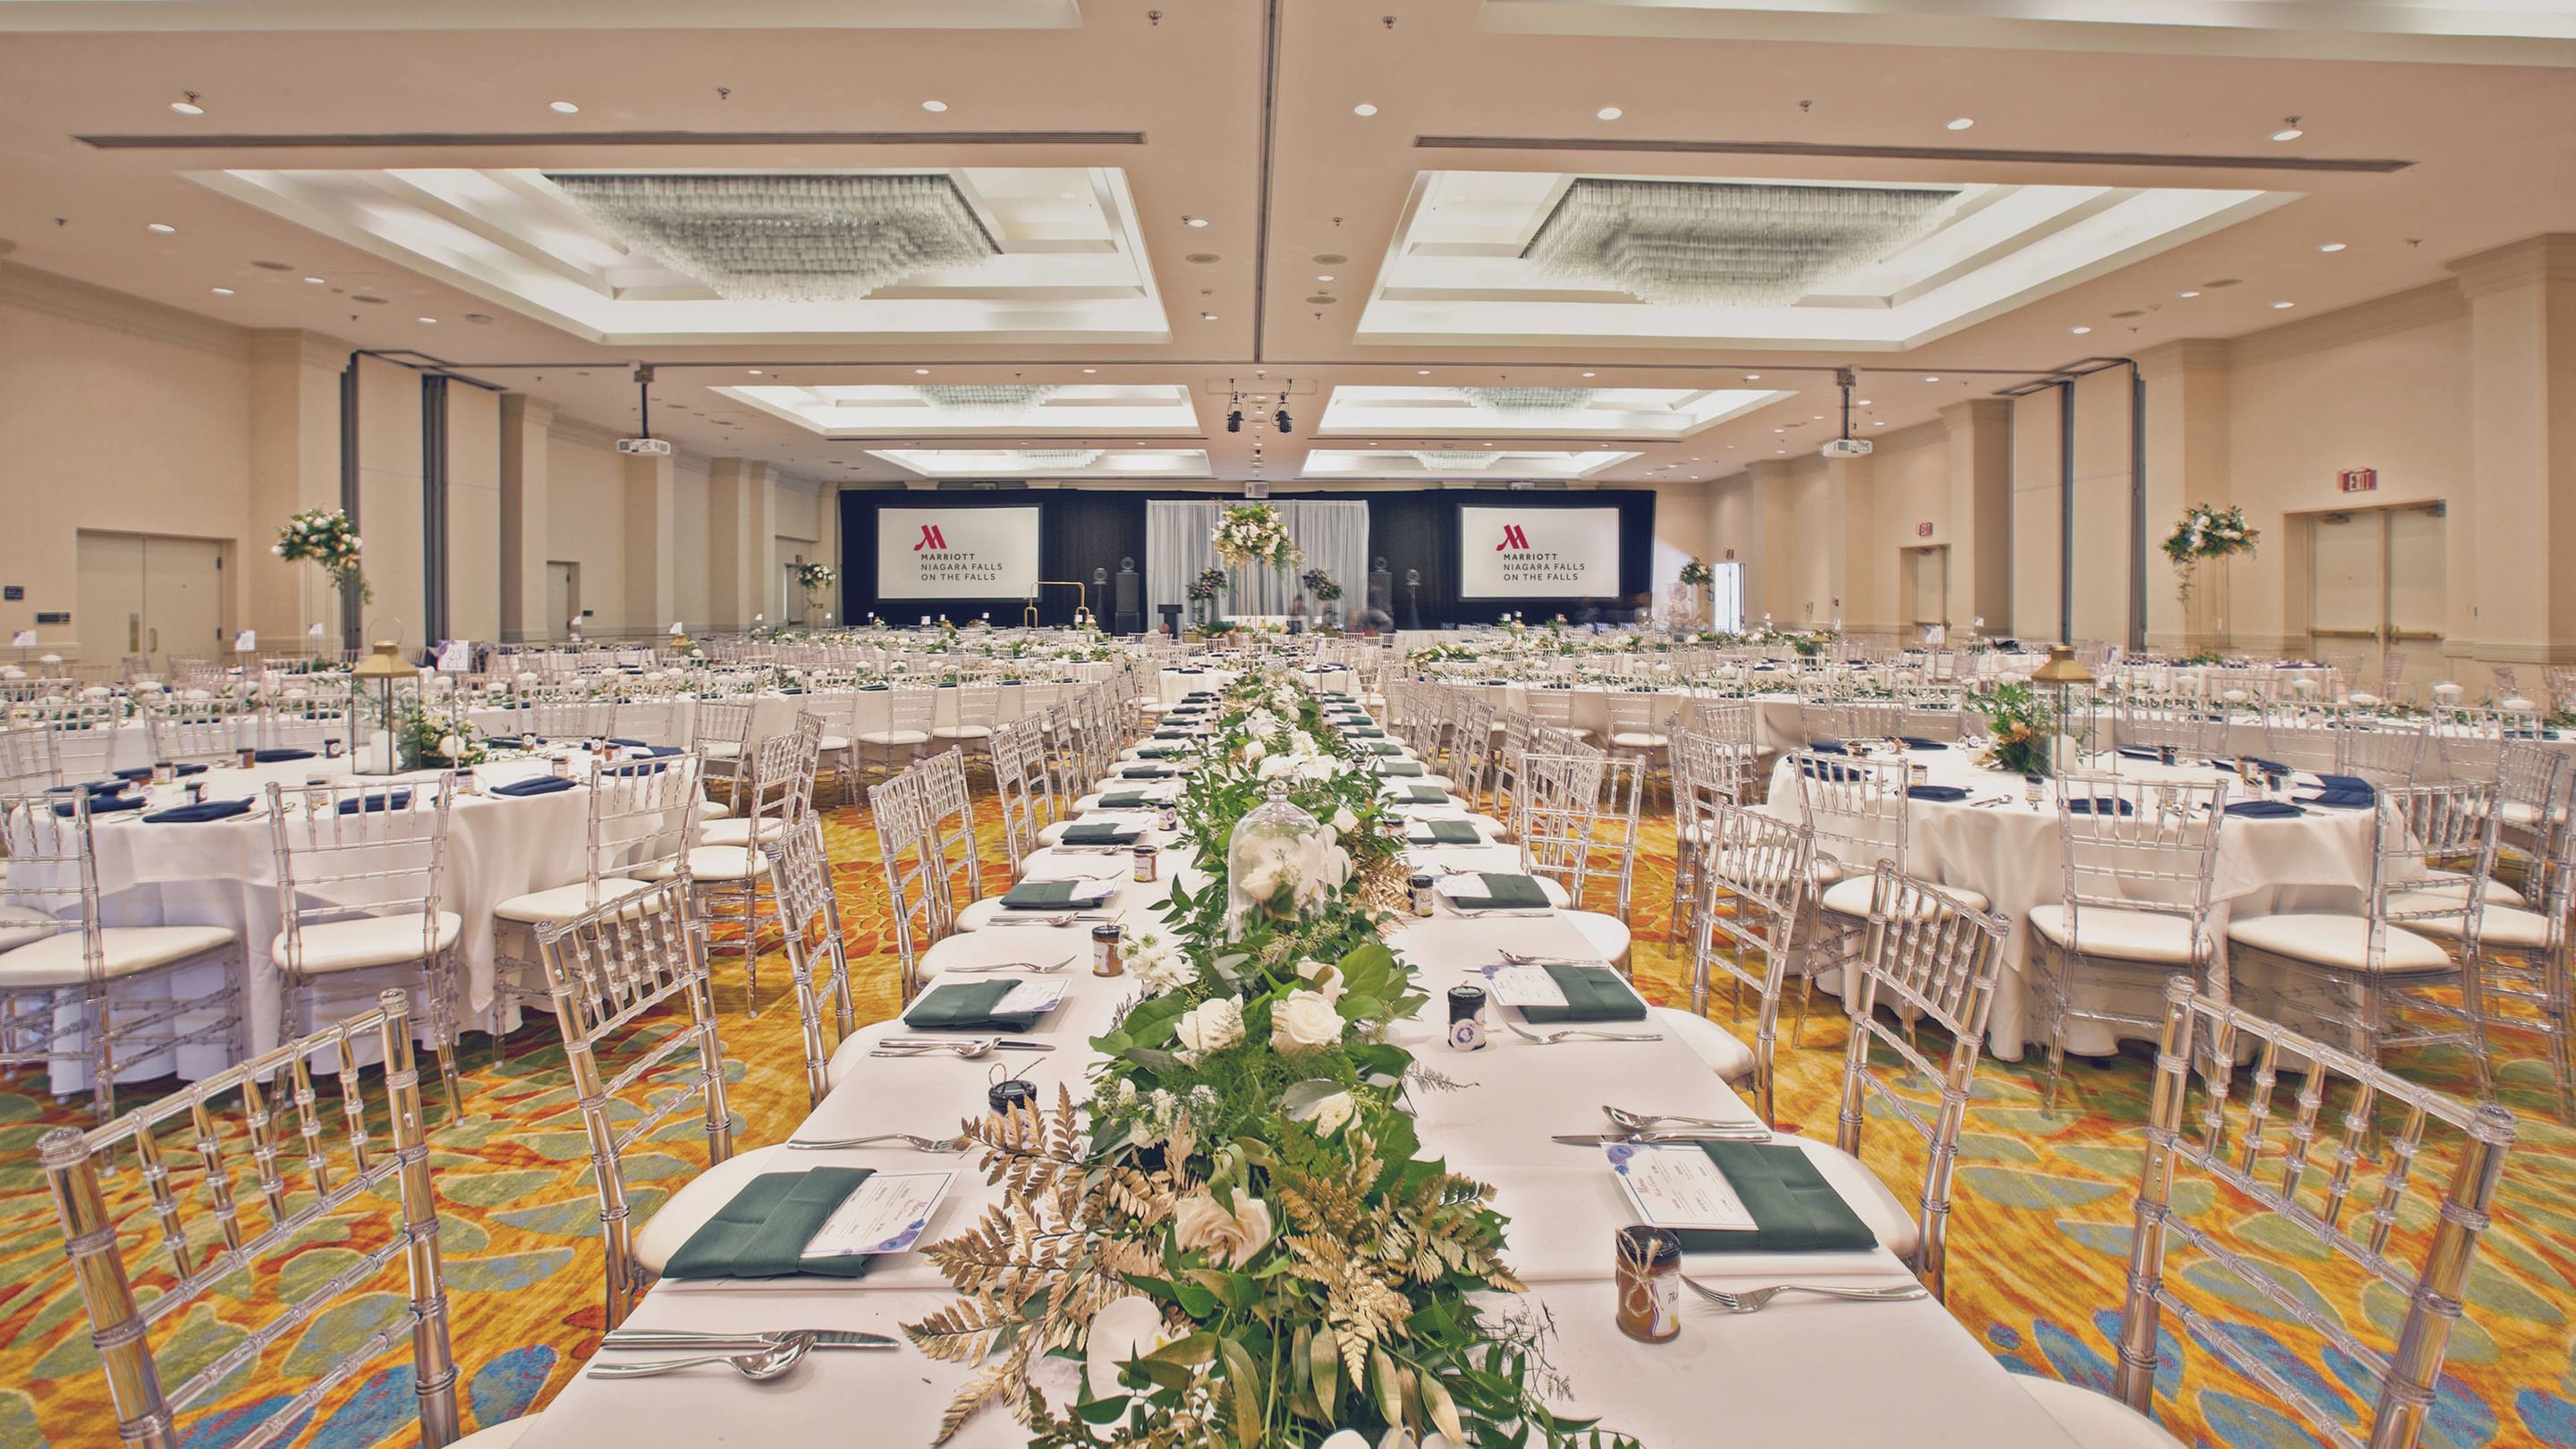 Wedding reception in large banquet room.